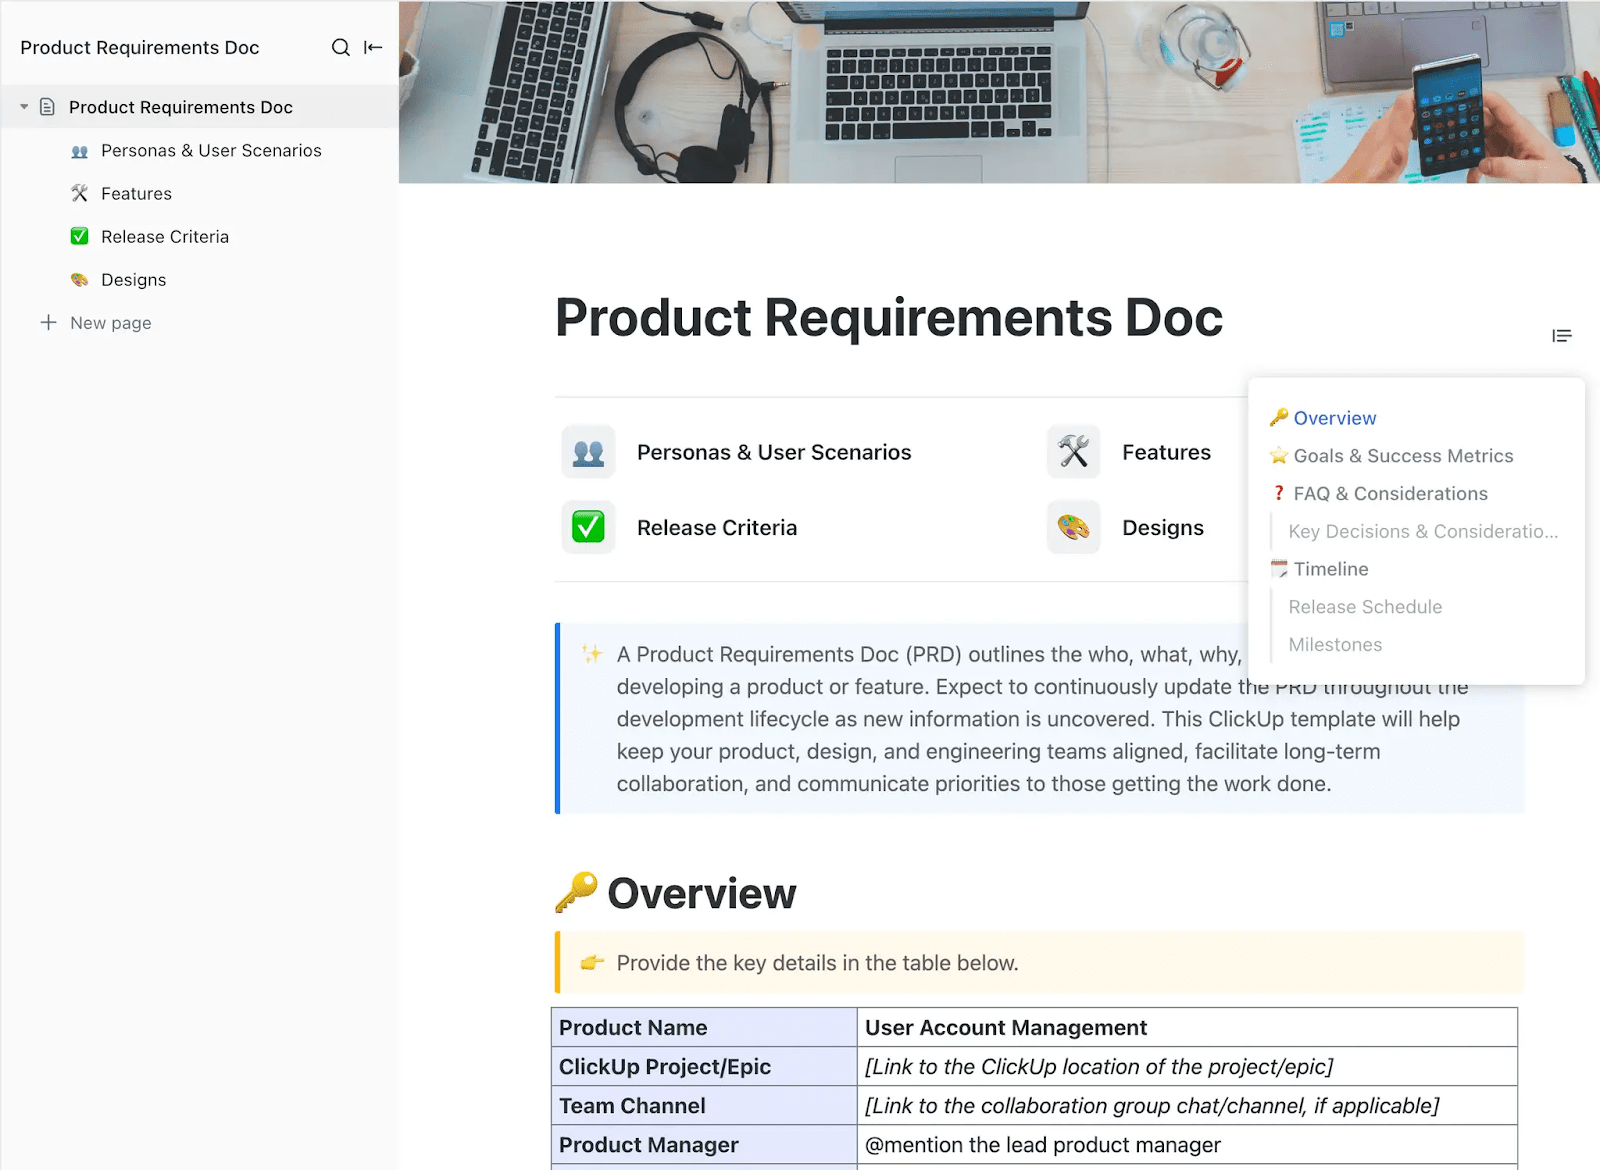 Outline the who, what, why, when, and how of developing a product or feature with ClickUp’s Product Requirements Doc Template